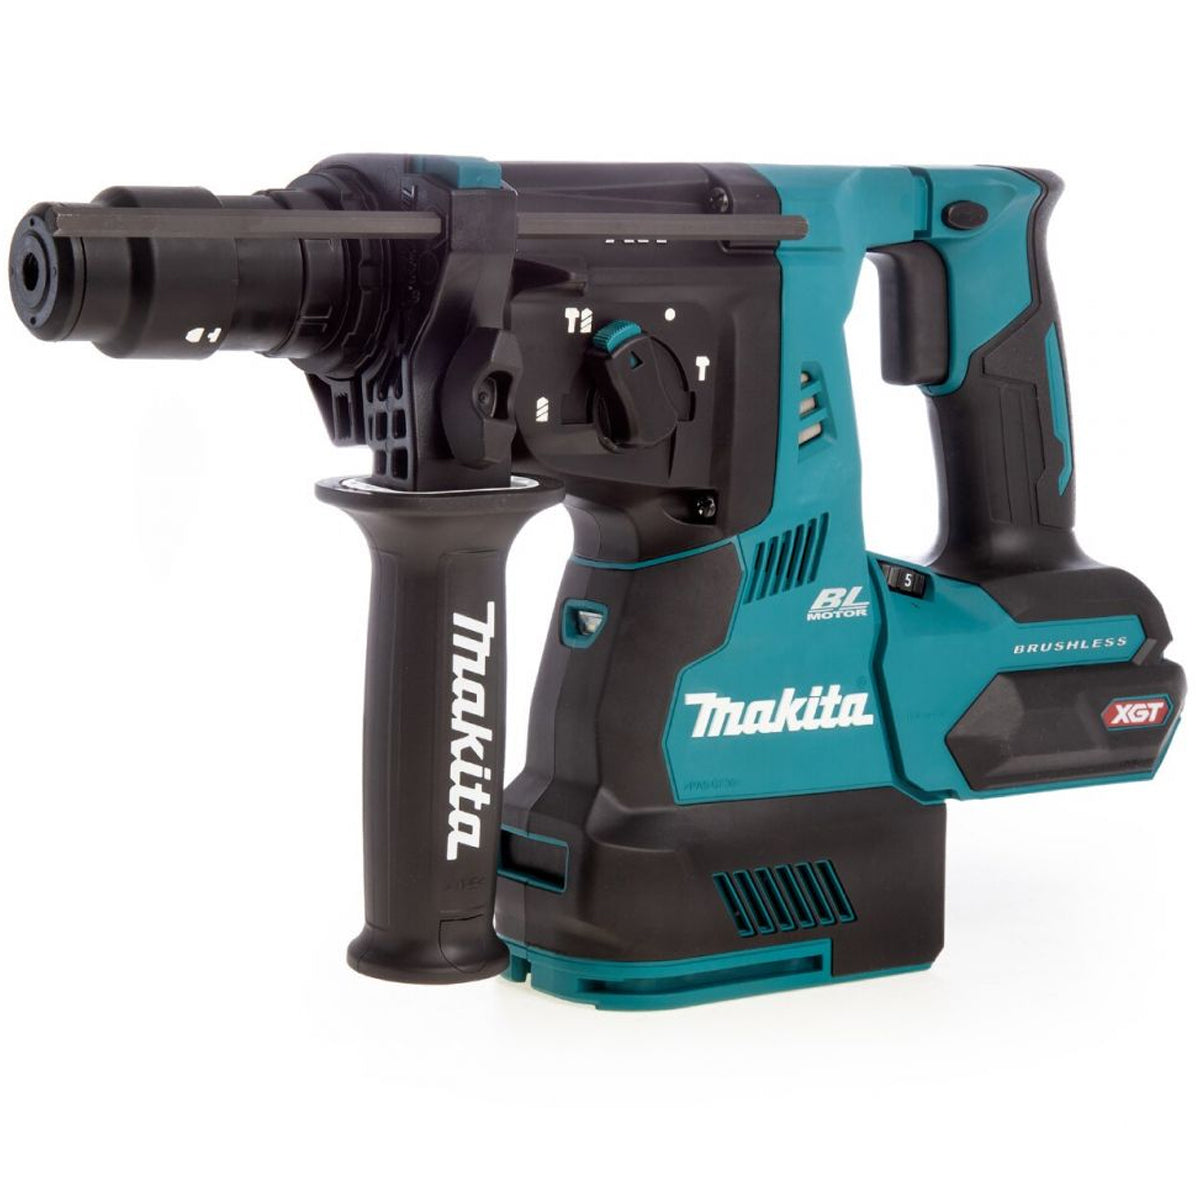 Makita HR003GZ 40V Brushless SDS+ Rotary Hammer Drill with 1 x 2.5Ah Battery Charger & Bag